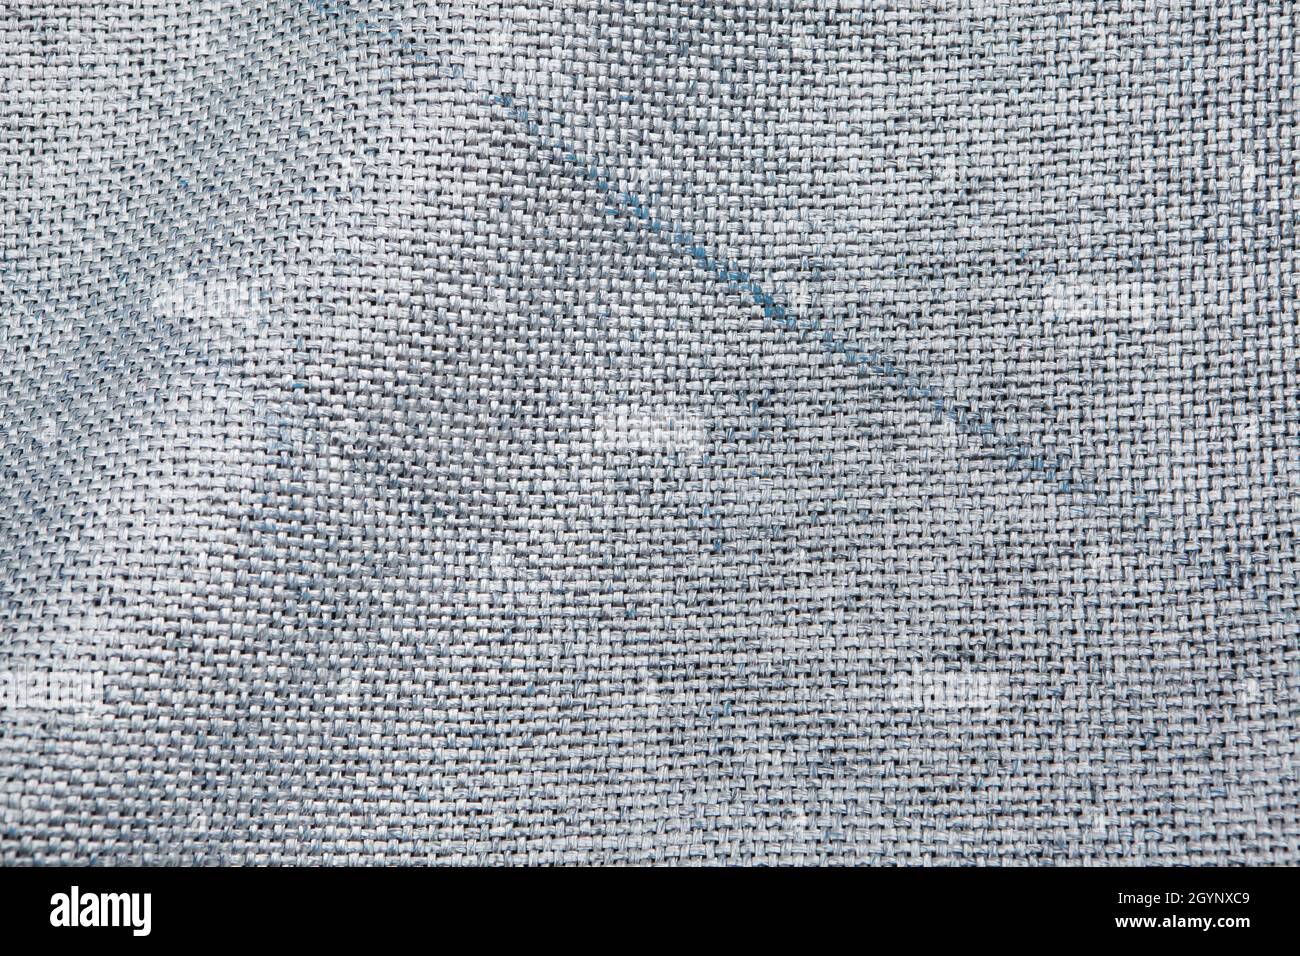 Detail of the Arc de Triomphe wrapped in silver-blue fabric in the Place Charles de Gaulle in Paris, France. The Arc de Triomphe was wrapped for two weeks being converted to an artwork as it was designed by Christo and Jeanne-Claude in September 2021. Stock Photo